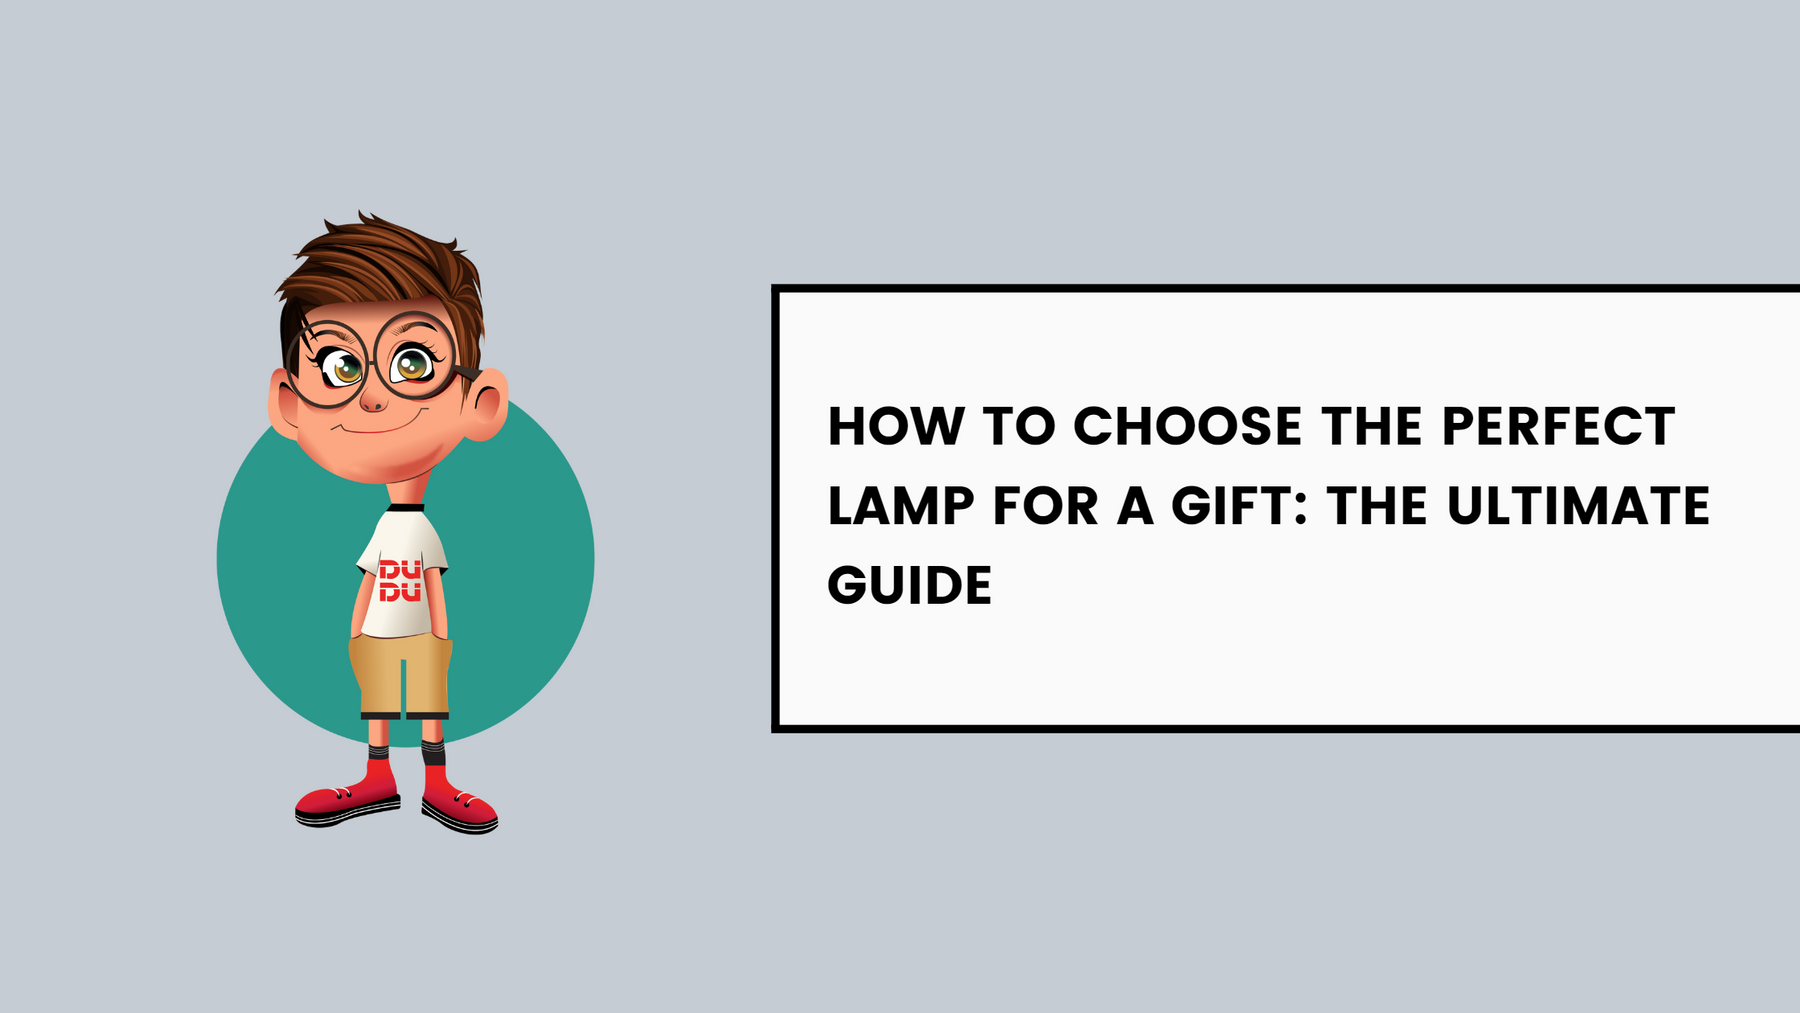 How to Choose the Perfect Lamp for a Gift: The Ultimate Guide